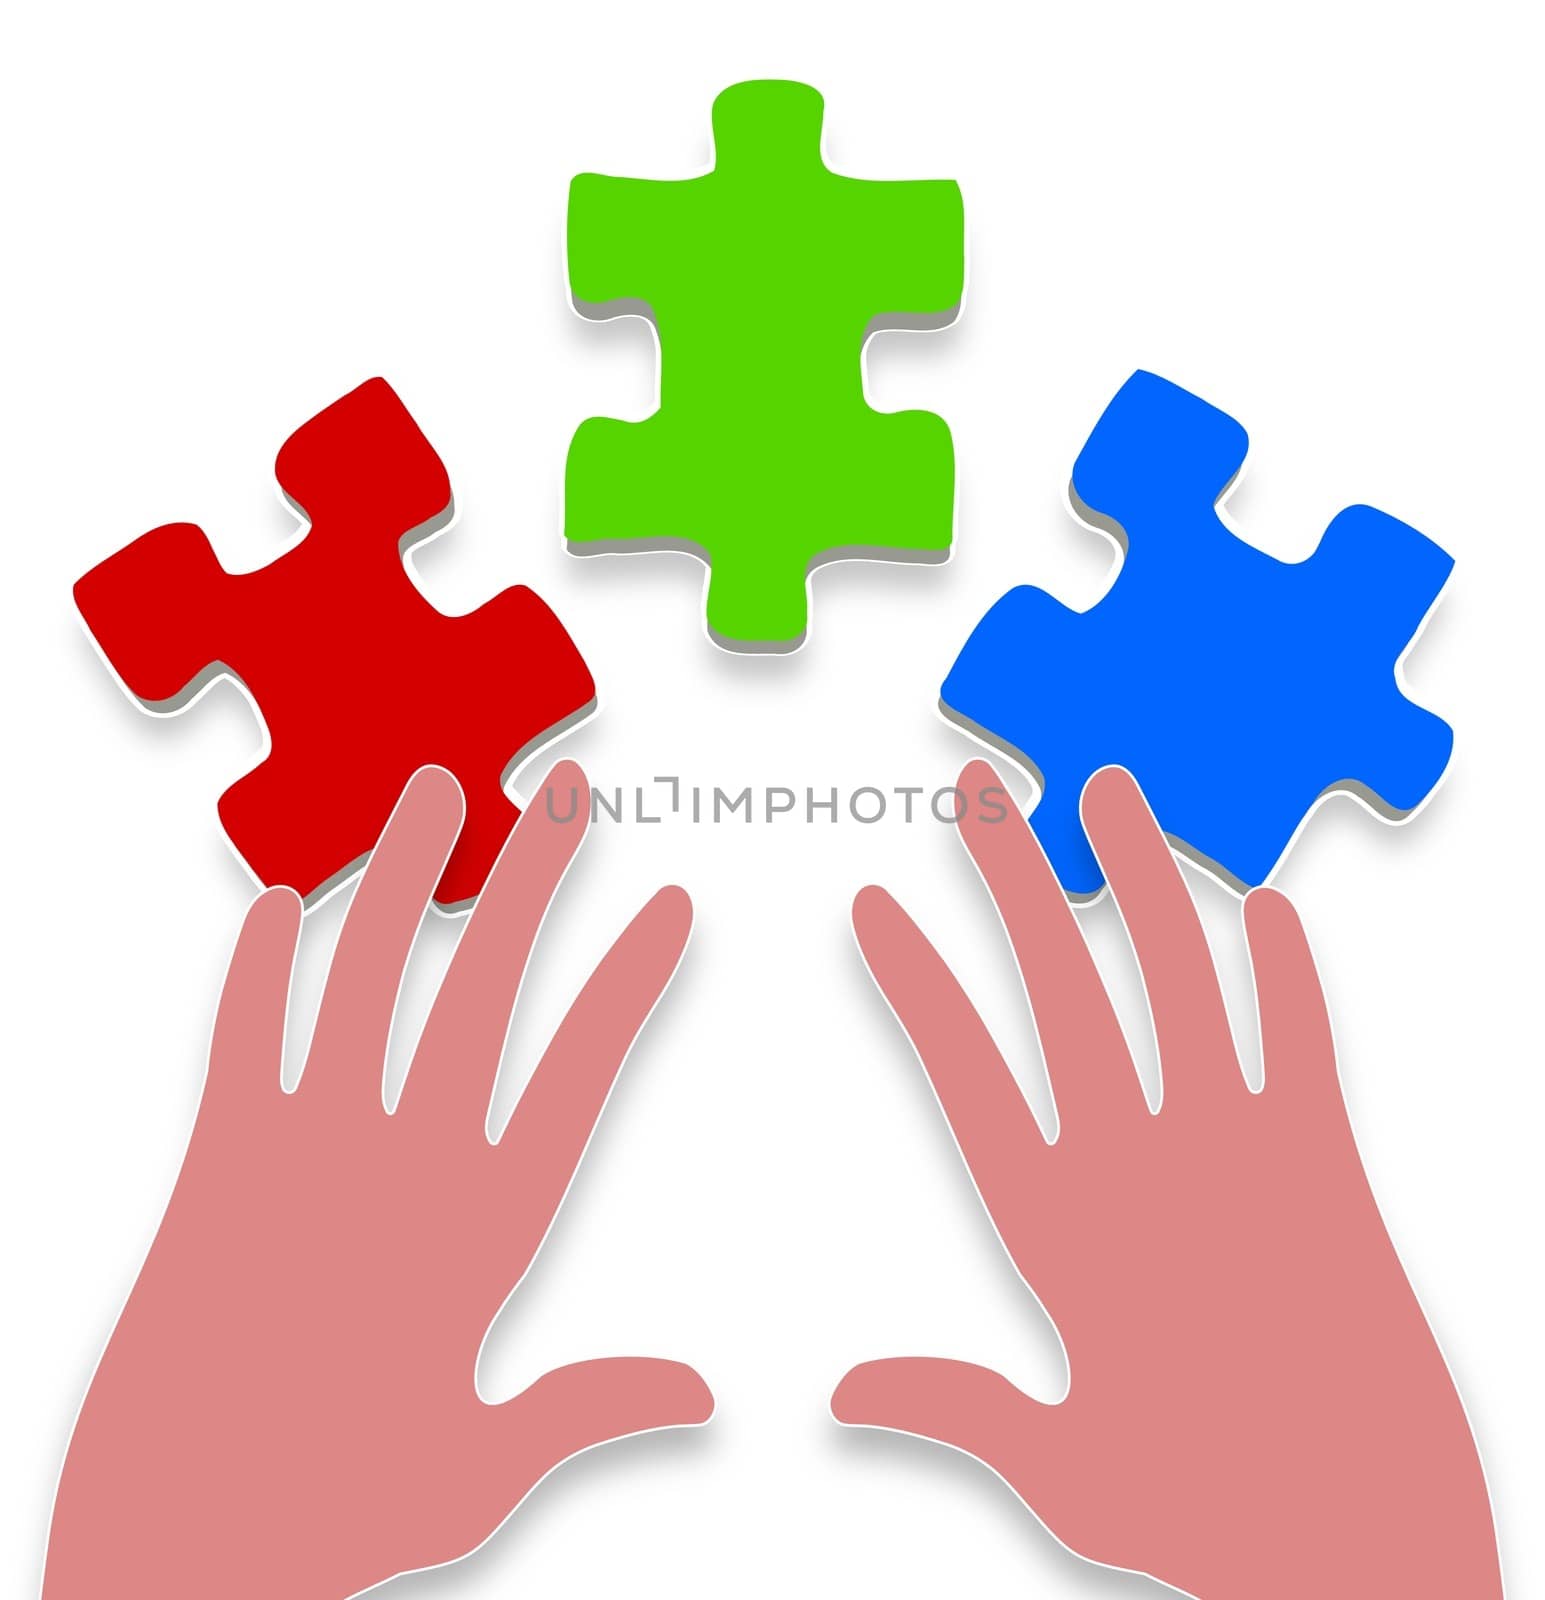 Illustration of a pair of hands and three puzzle pieces